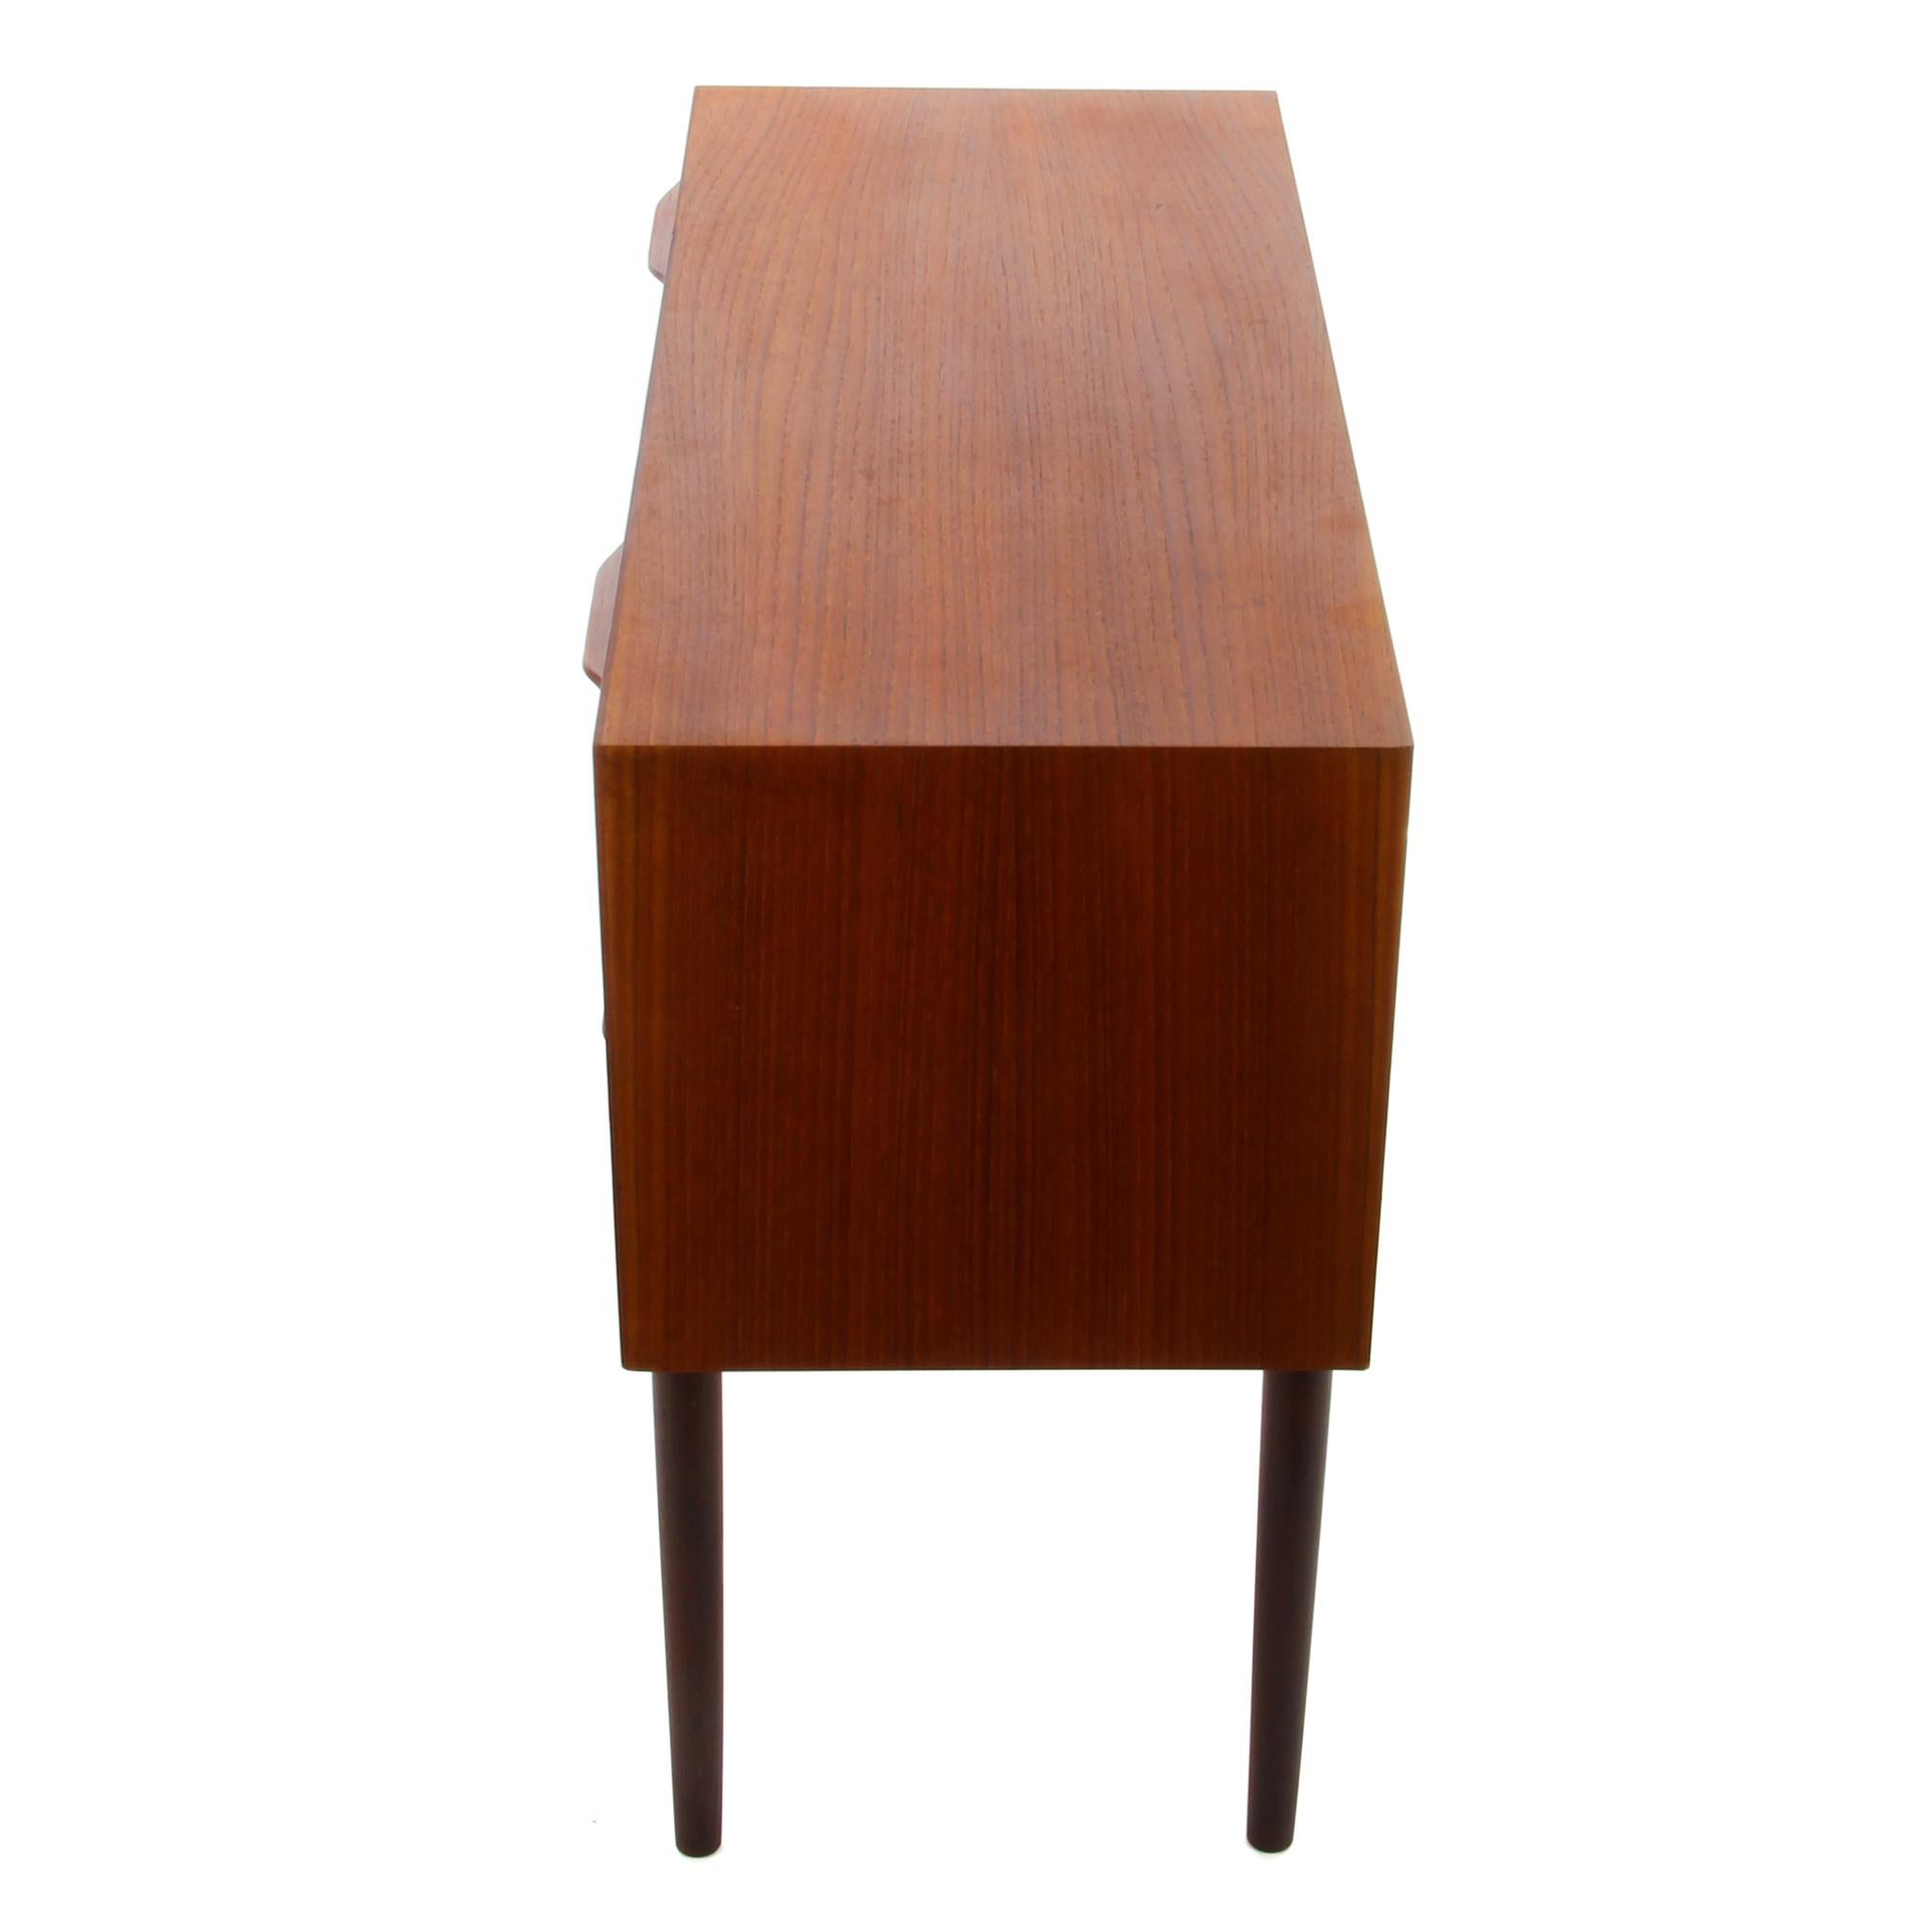 Teak Chest of Drawers from the 1960s, Danish Midcentury Dresser with Drawers 3